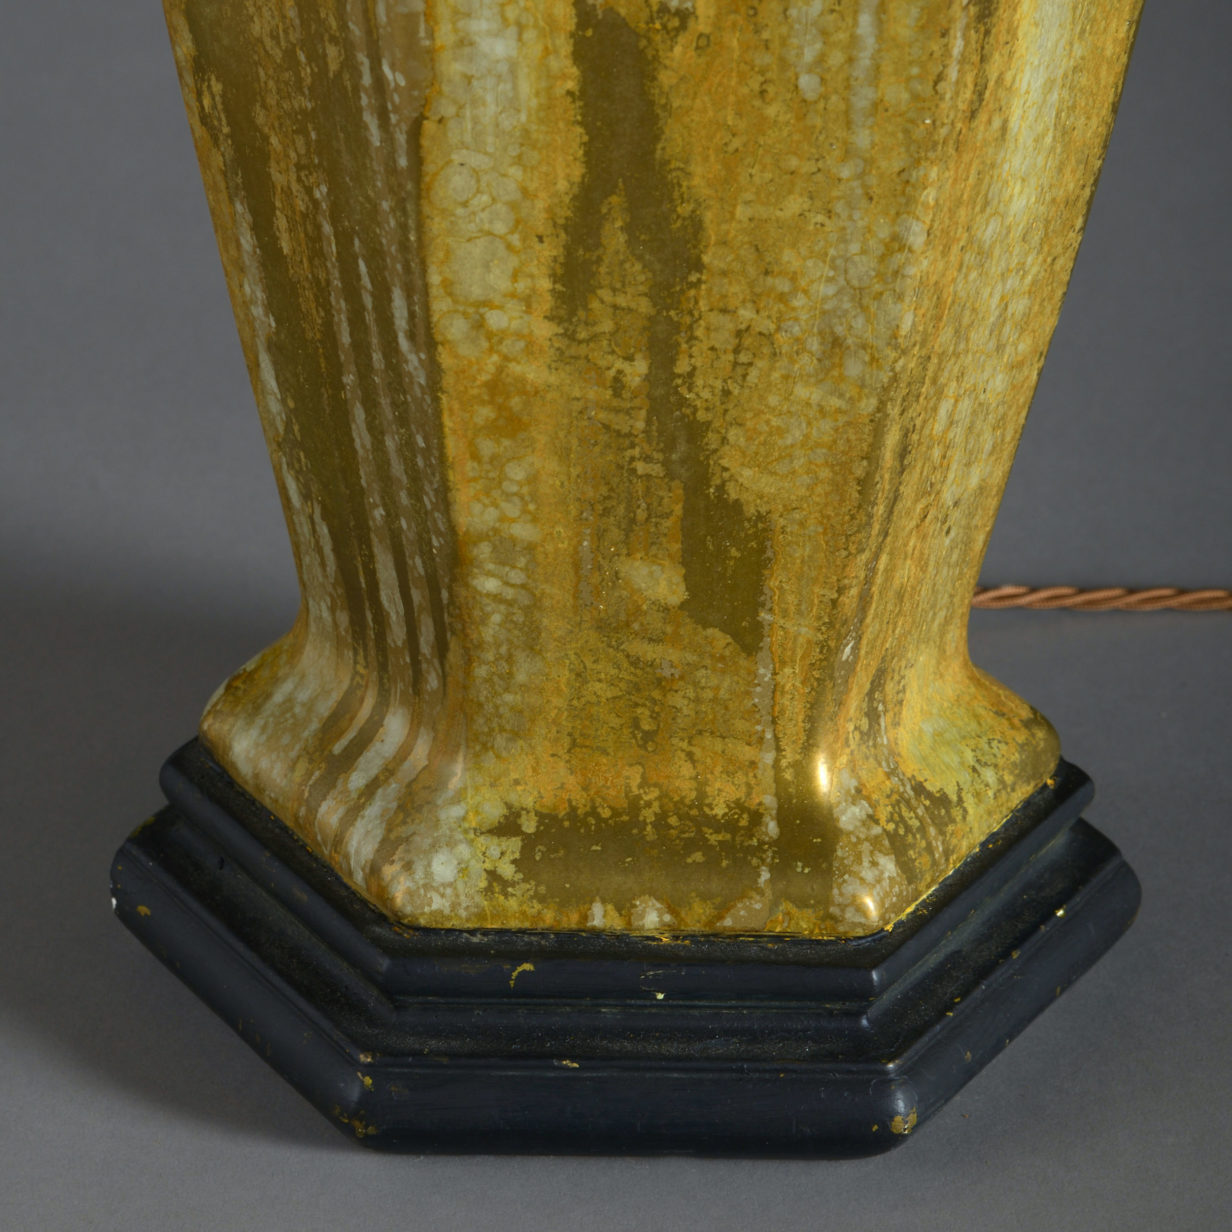 A 19th century cold painted ceramic table lamp